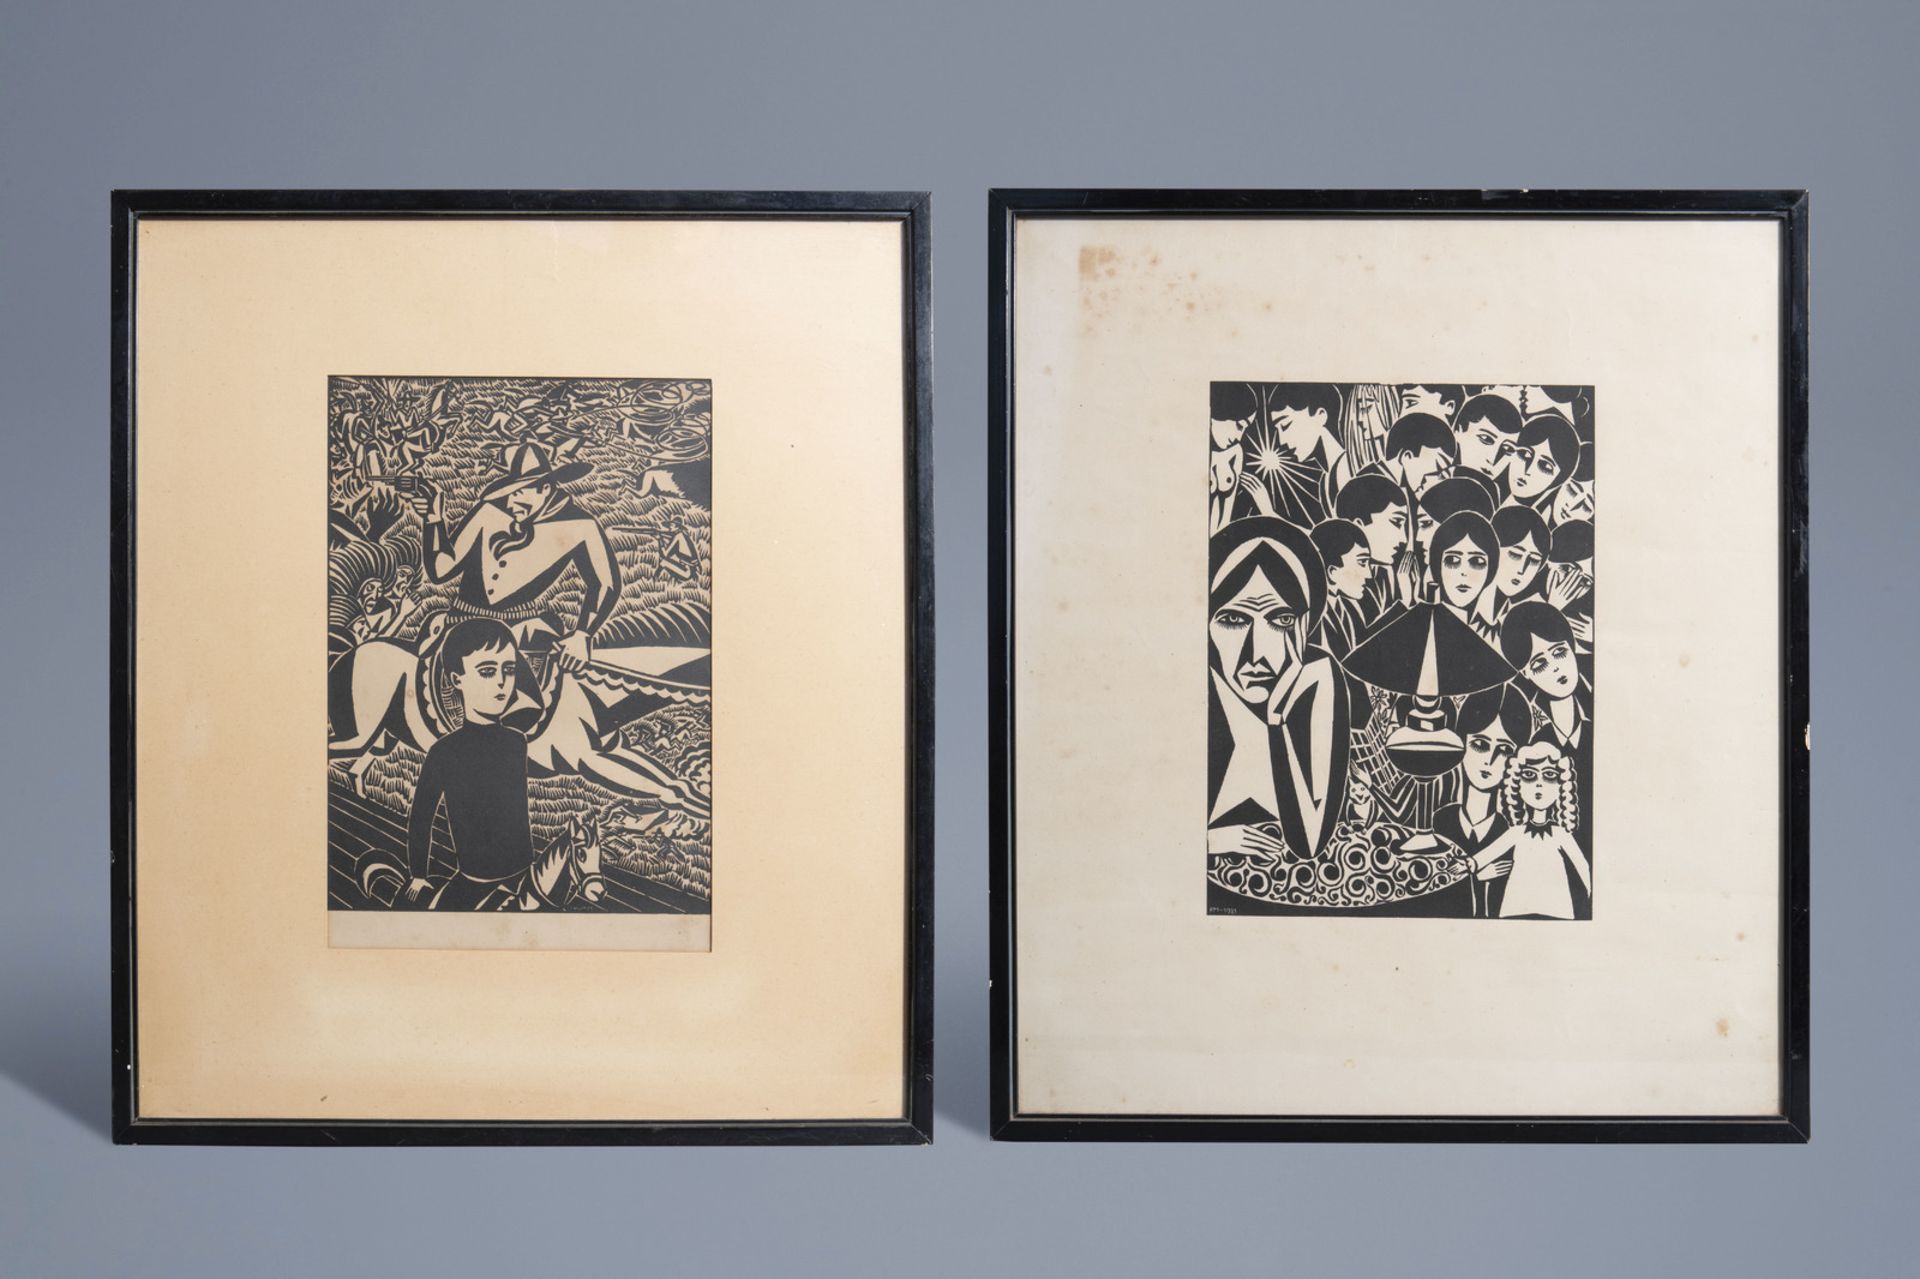 Frans Masereel (1889-1972): 'Souvenirs' and 'Le cheval de bois', two woodcuts, dated 1921 and 1922